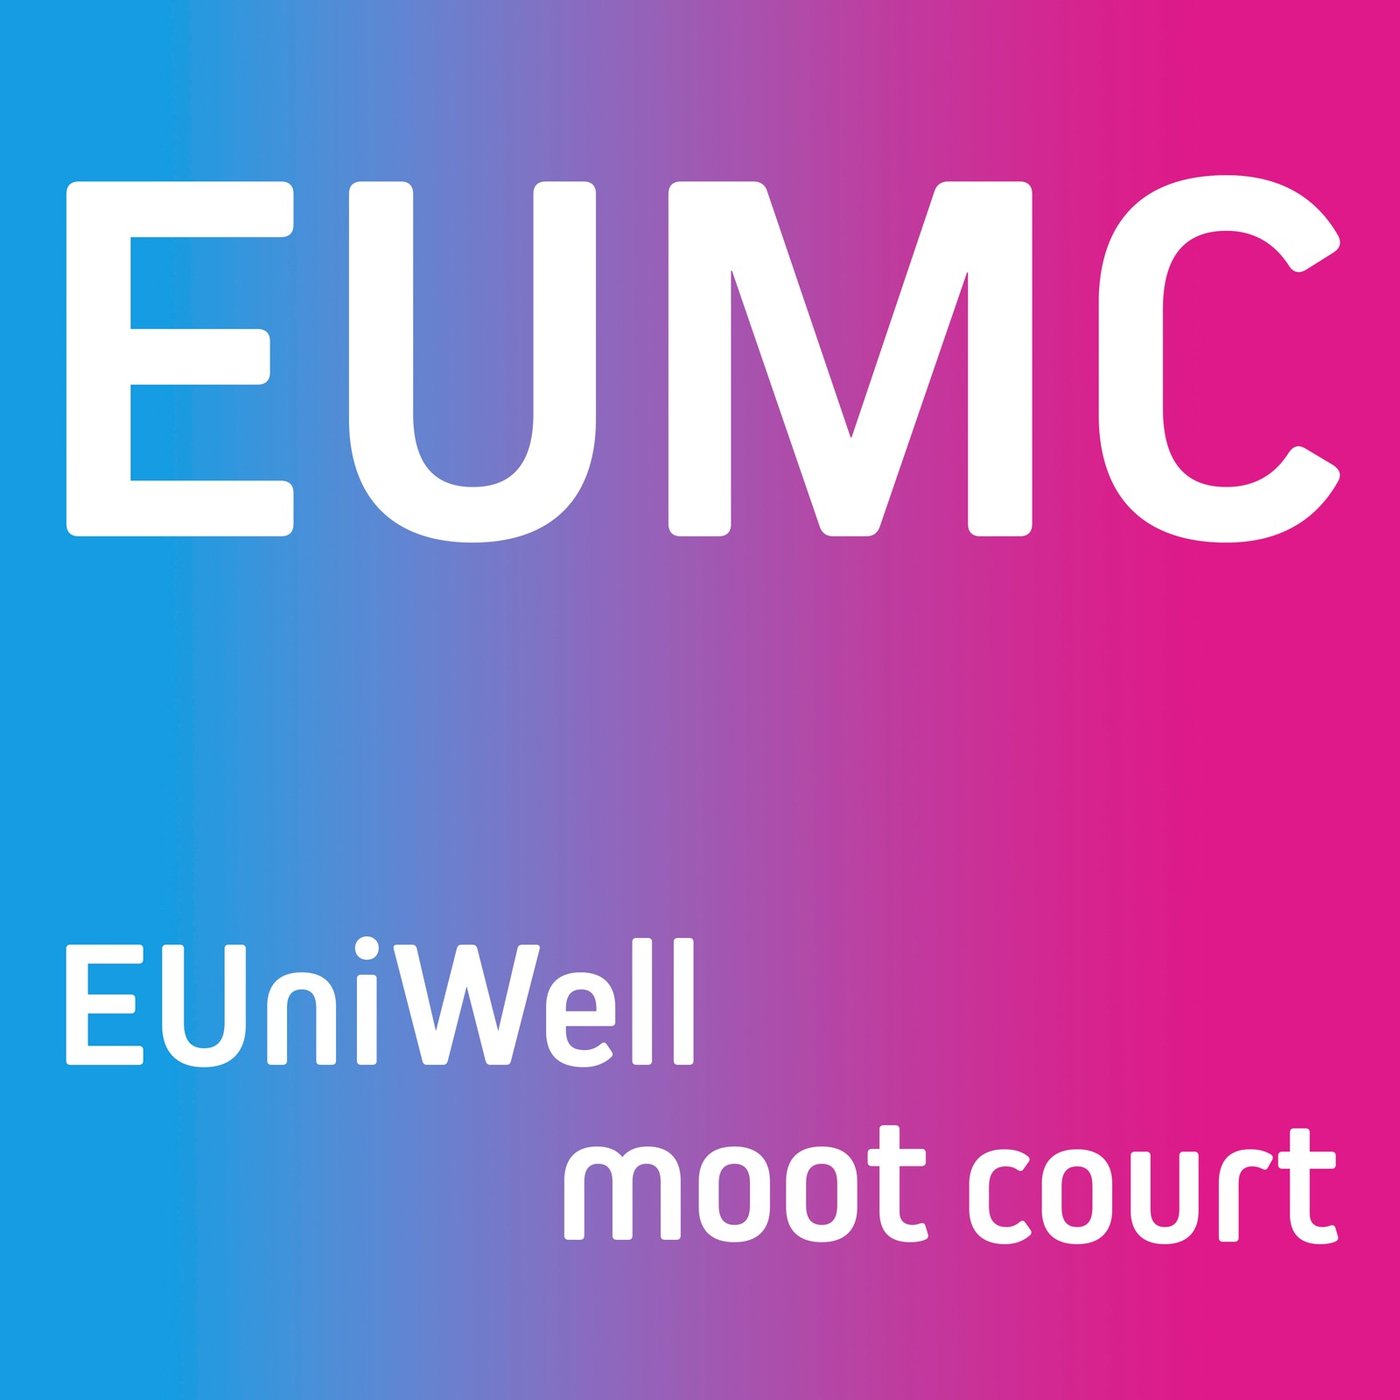 The University of Murcia hosts the EUniWell Moot Court